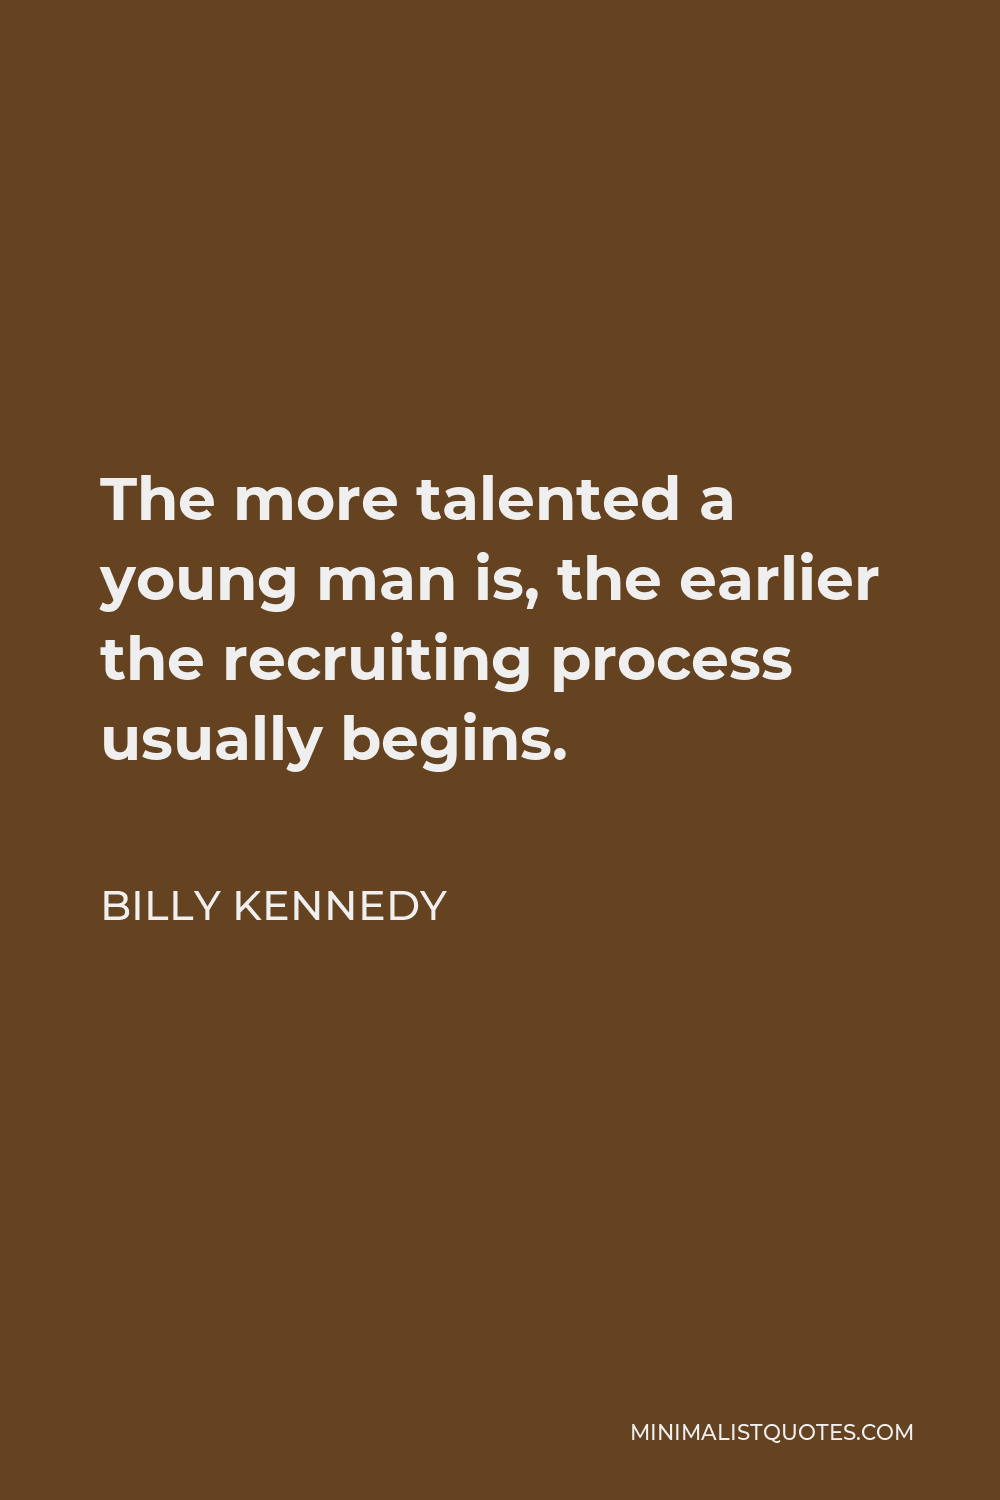 Billy Kennedy Quote - The more talented a young man is, the earlier the recruiting process usually begins.